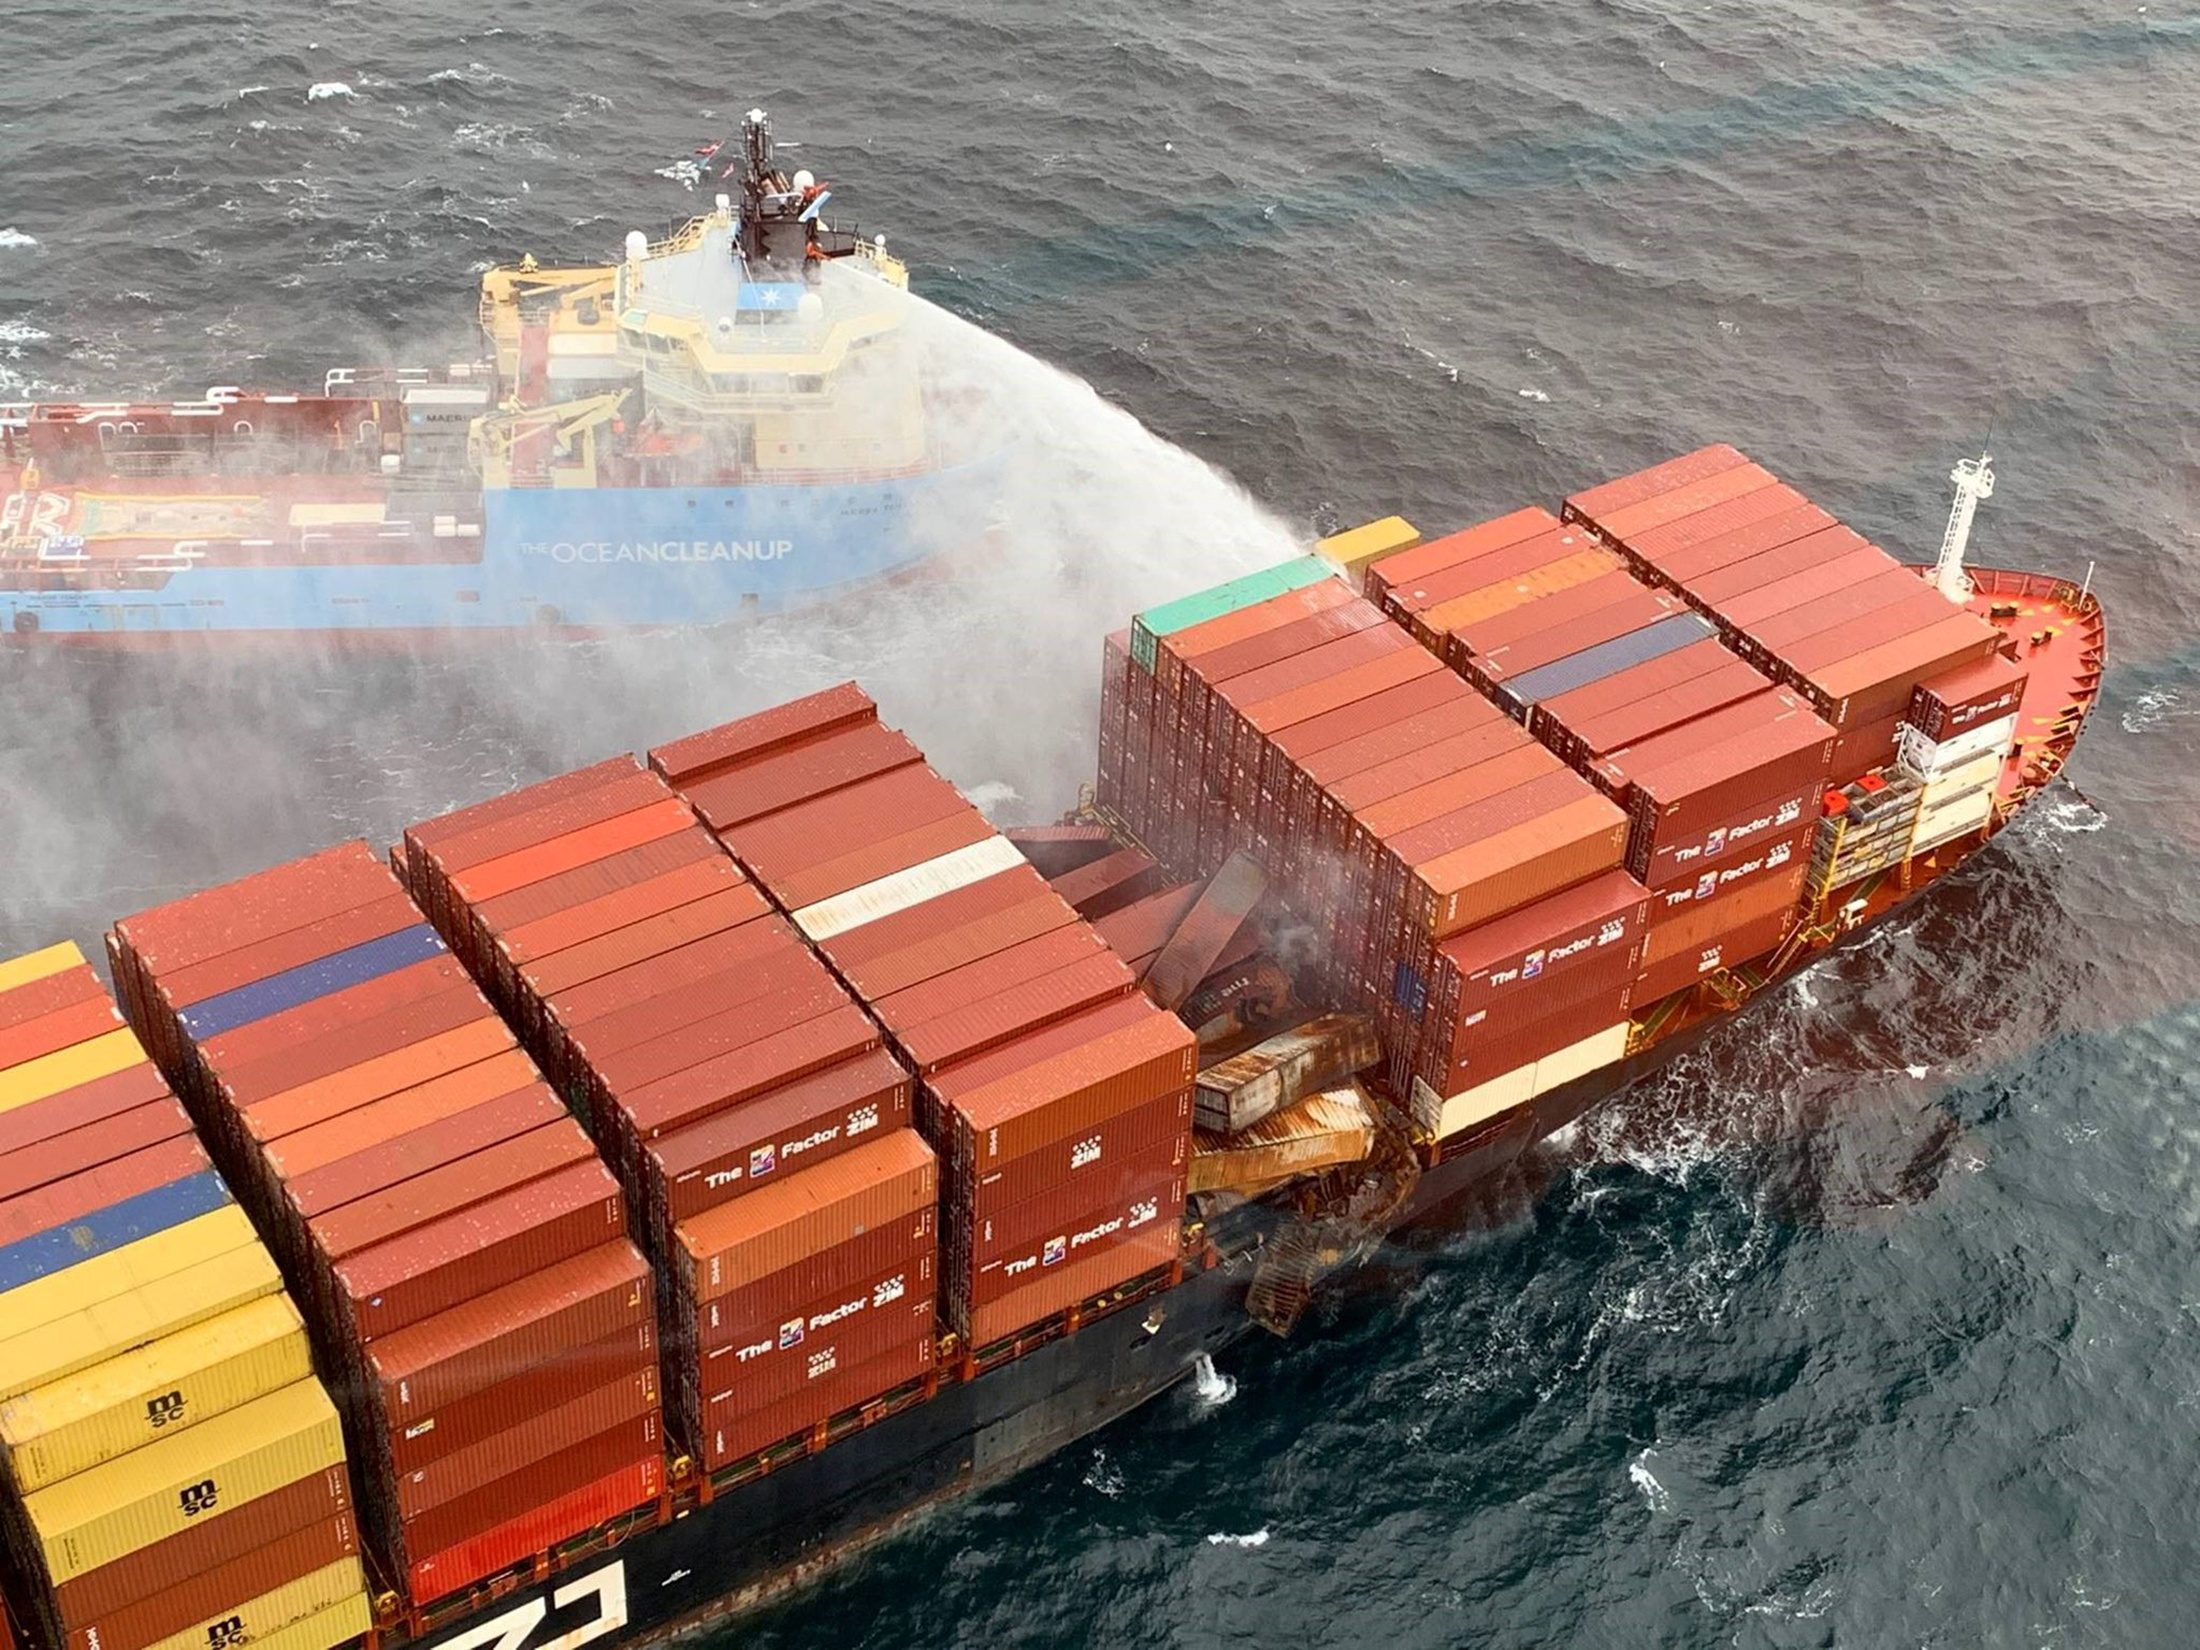 Shipping Industry Groups to Tackle Crucial Safety Issues in Cargo Transport